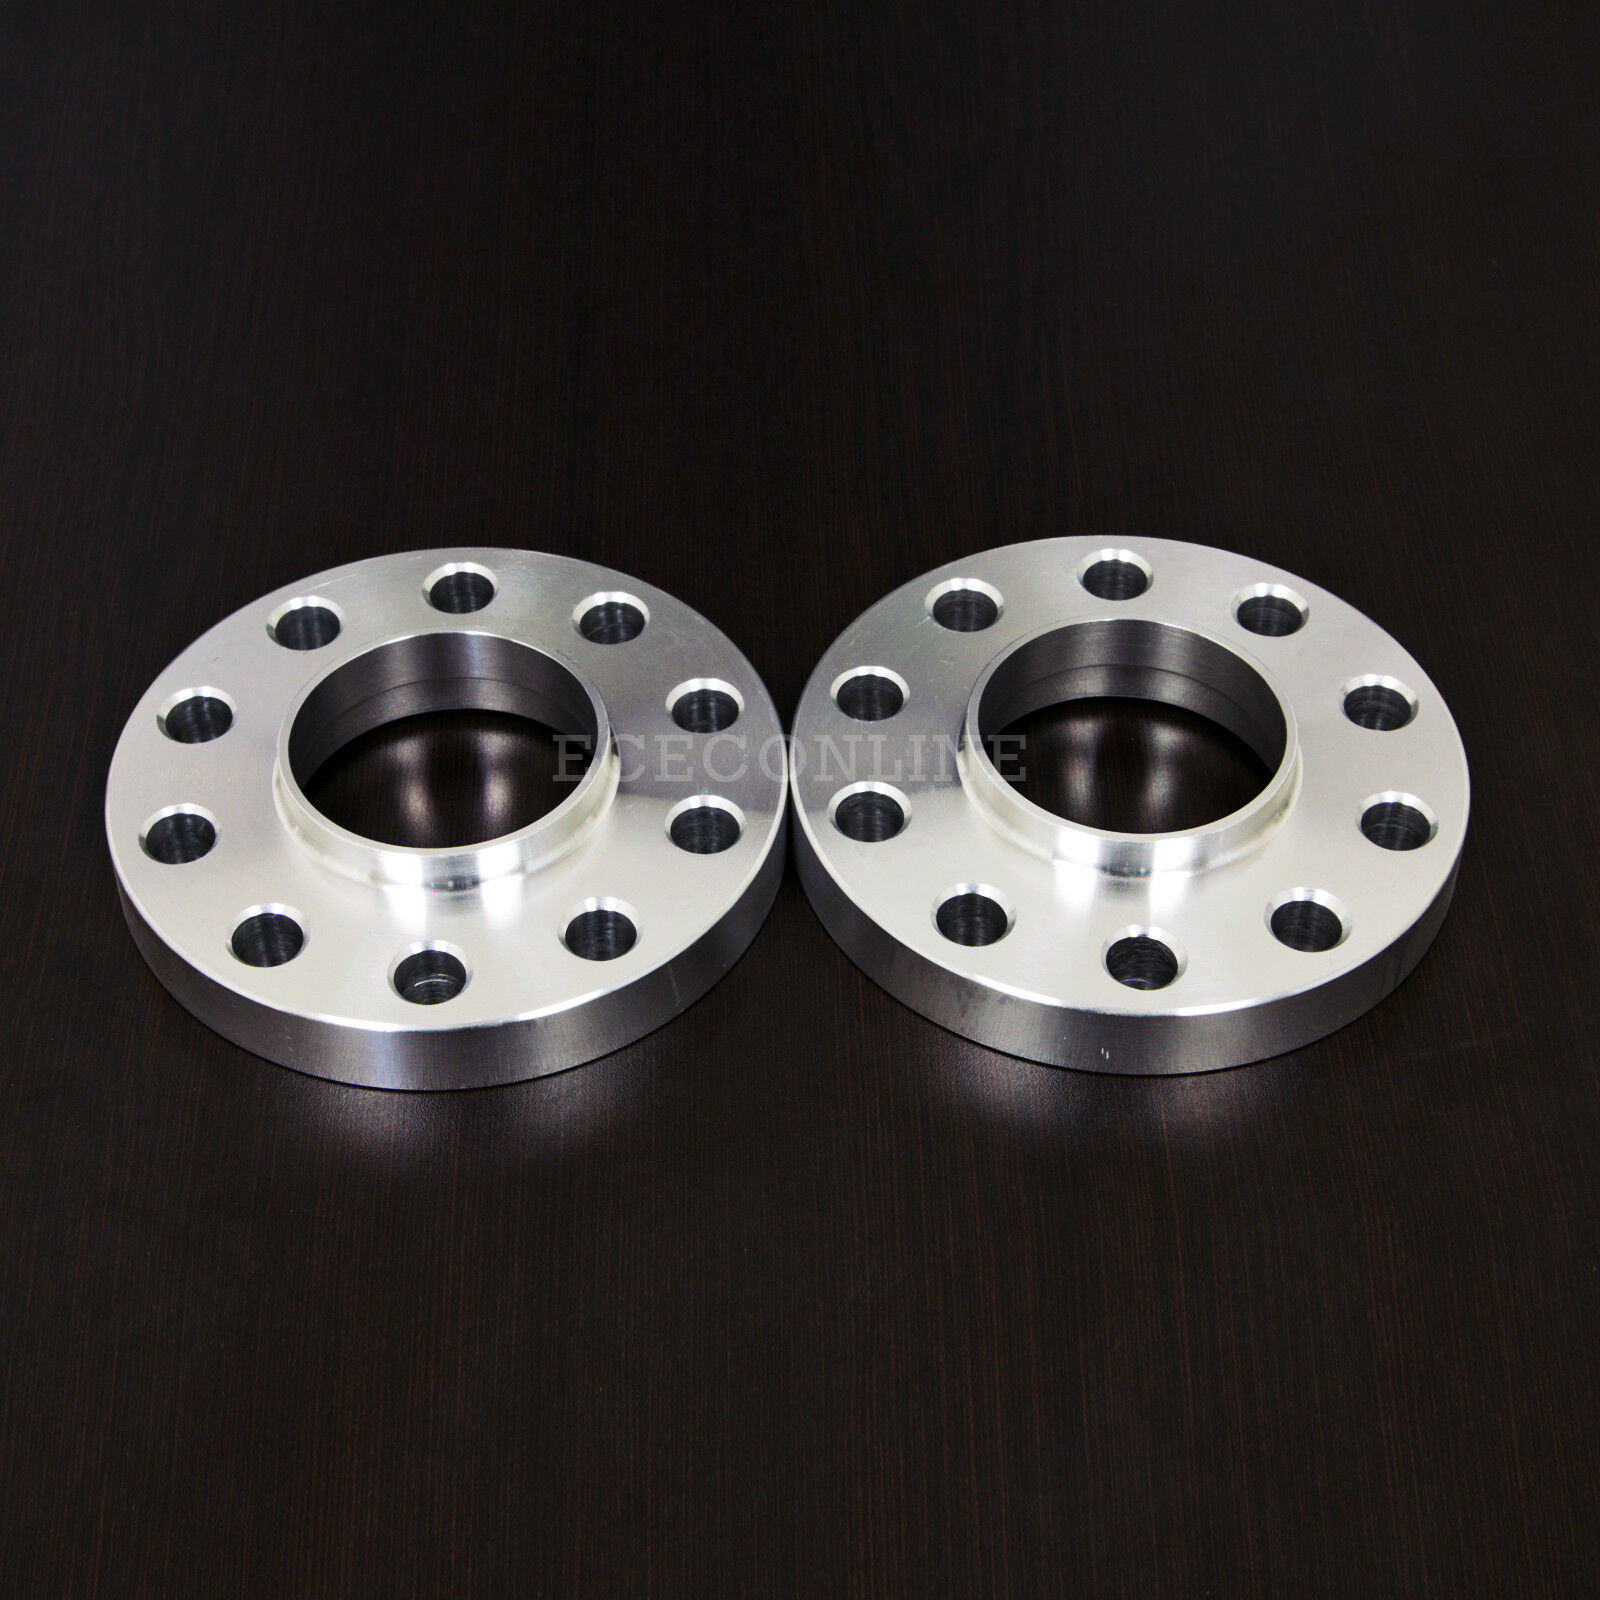 2pc 15mm Hubcentric 5x120 Wheel Spacers - Centerbore Adapter 74.1mm to 72.6mm